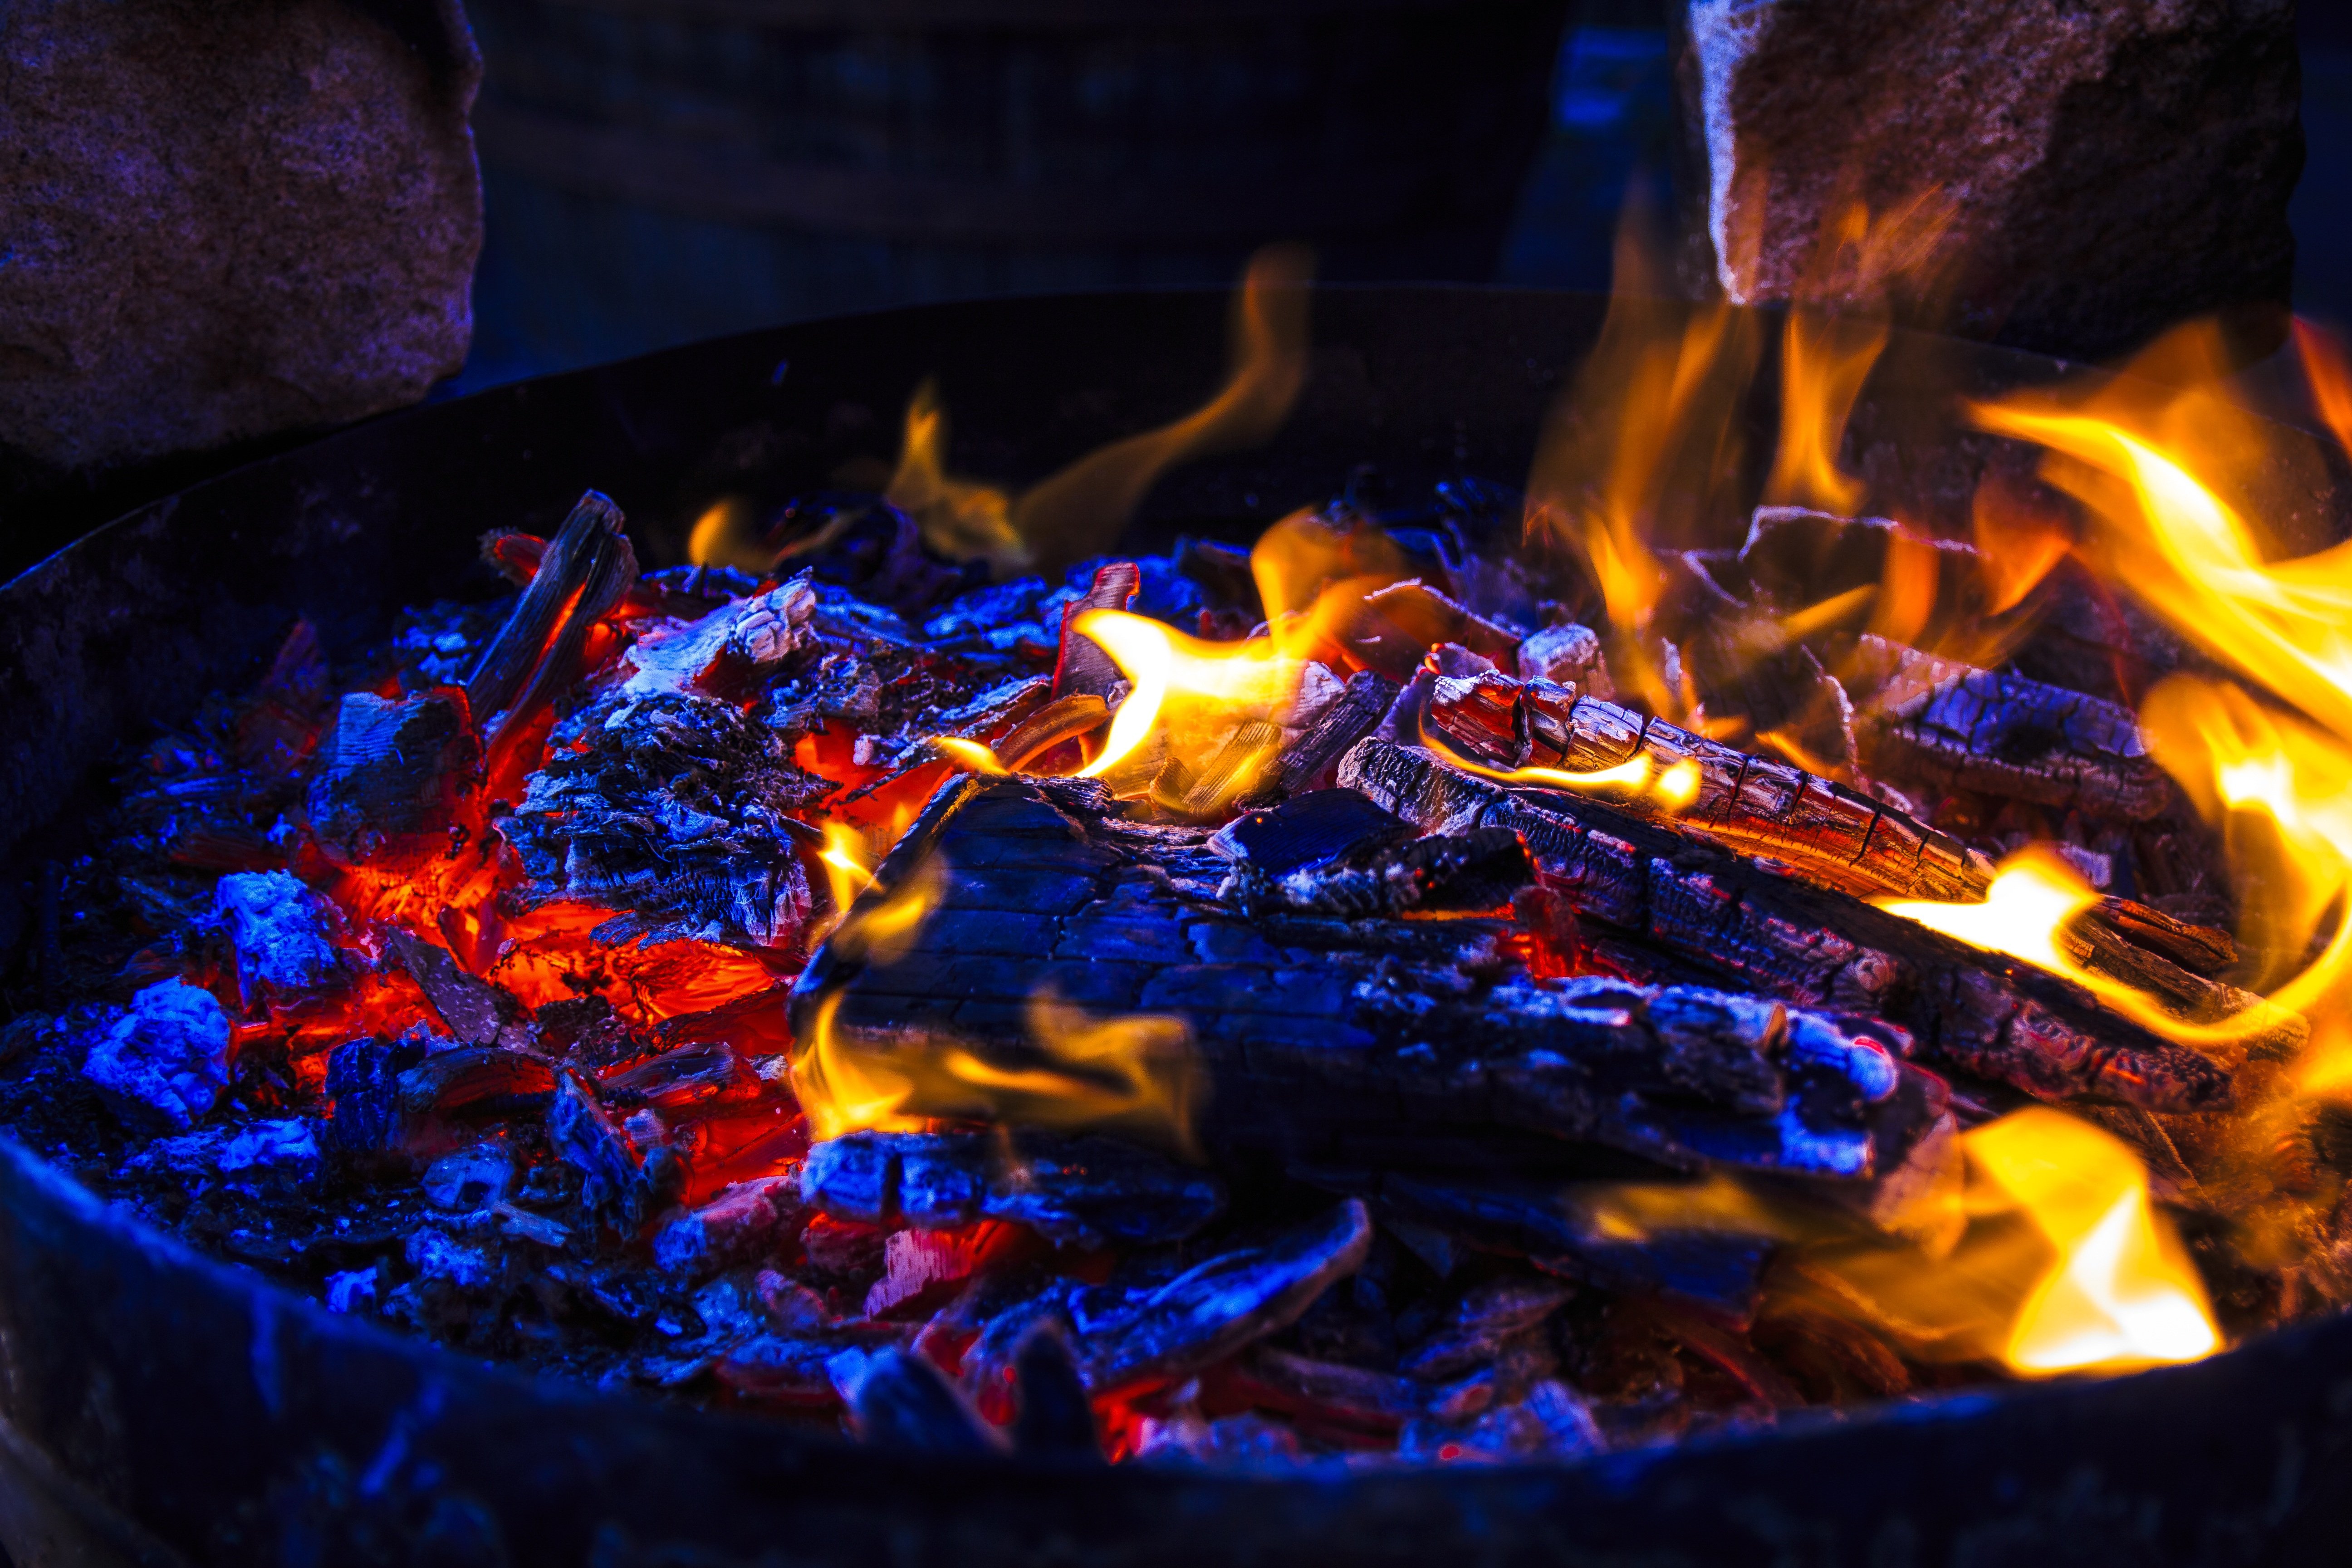 Wallpaper Burning Wood on Fire Pit, Background Free Image